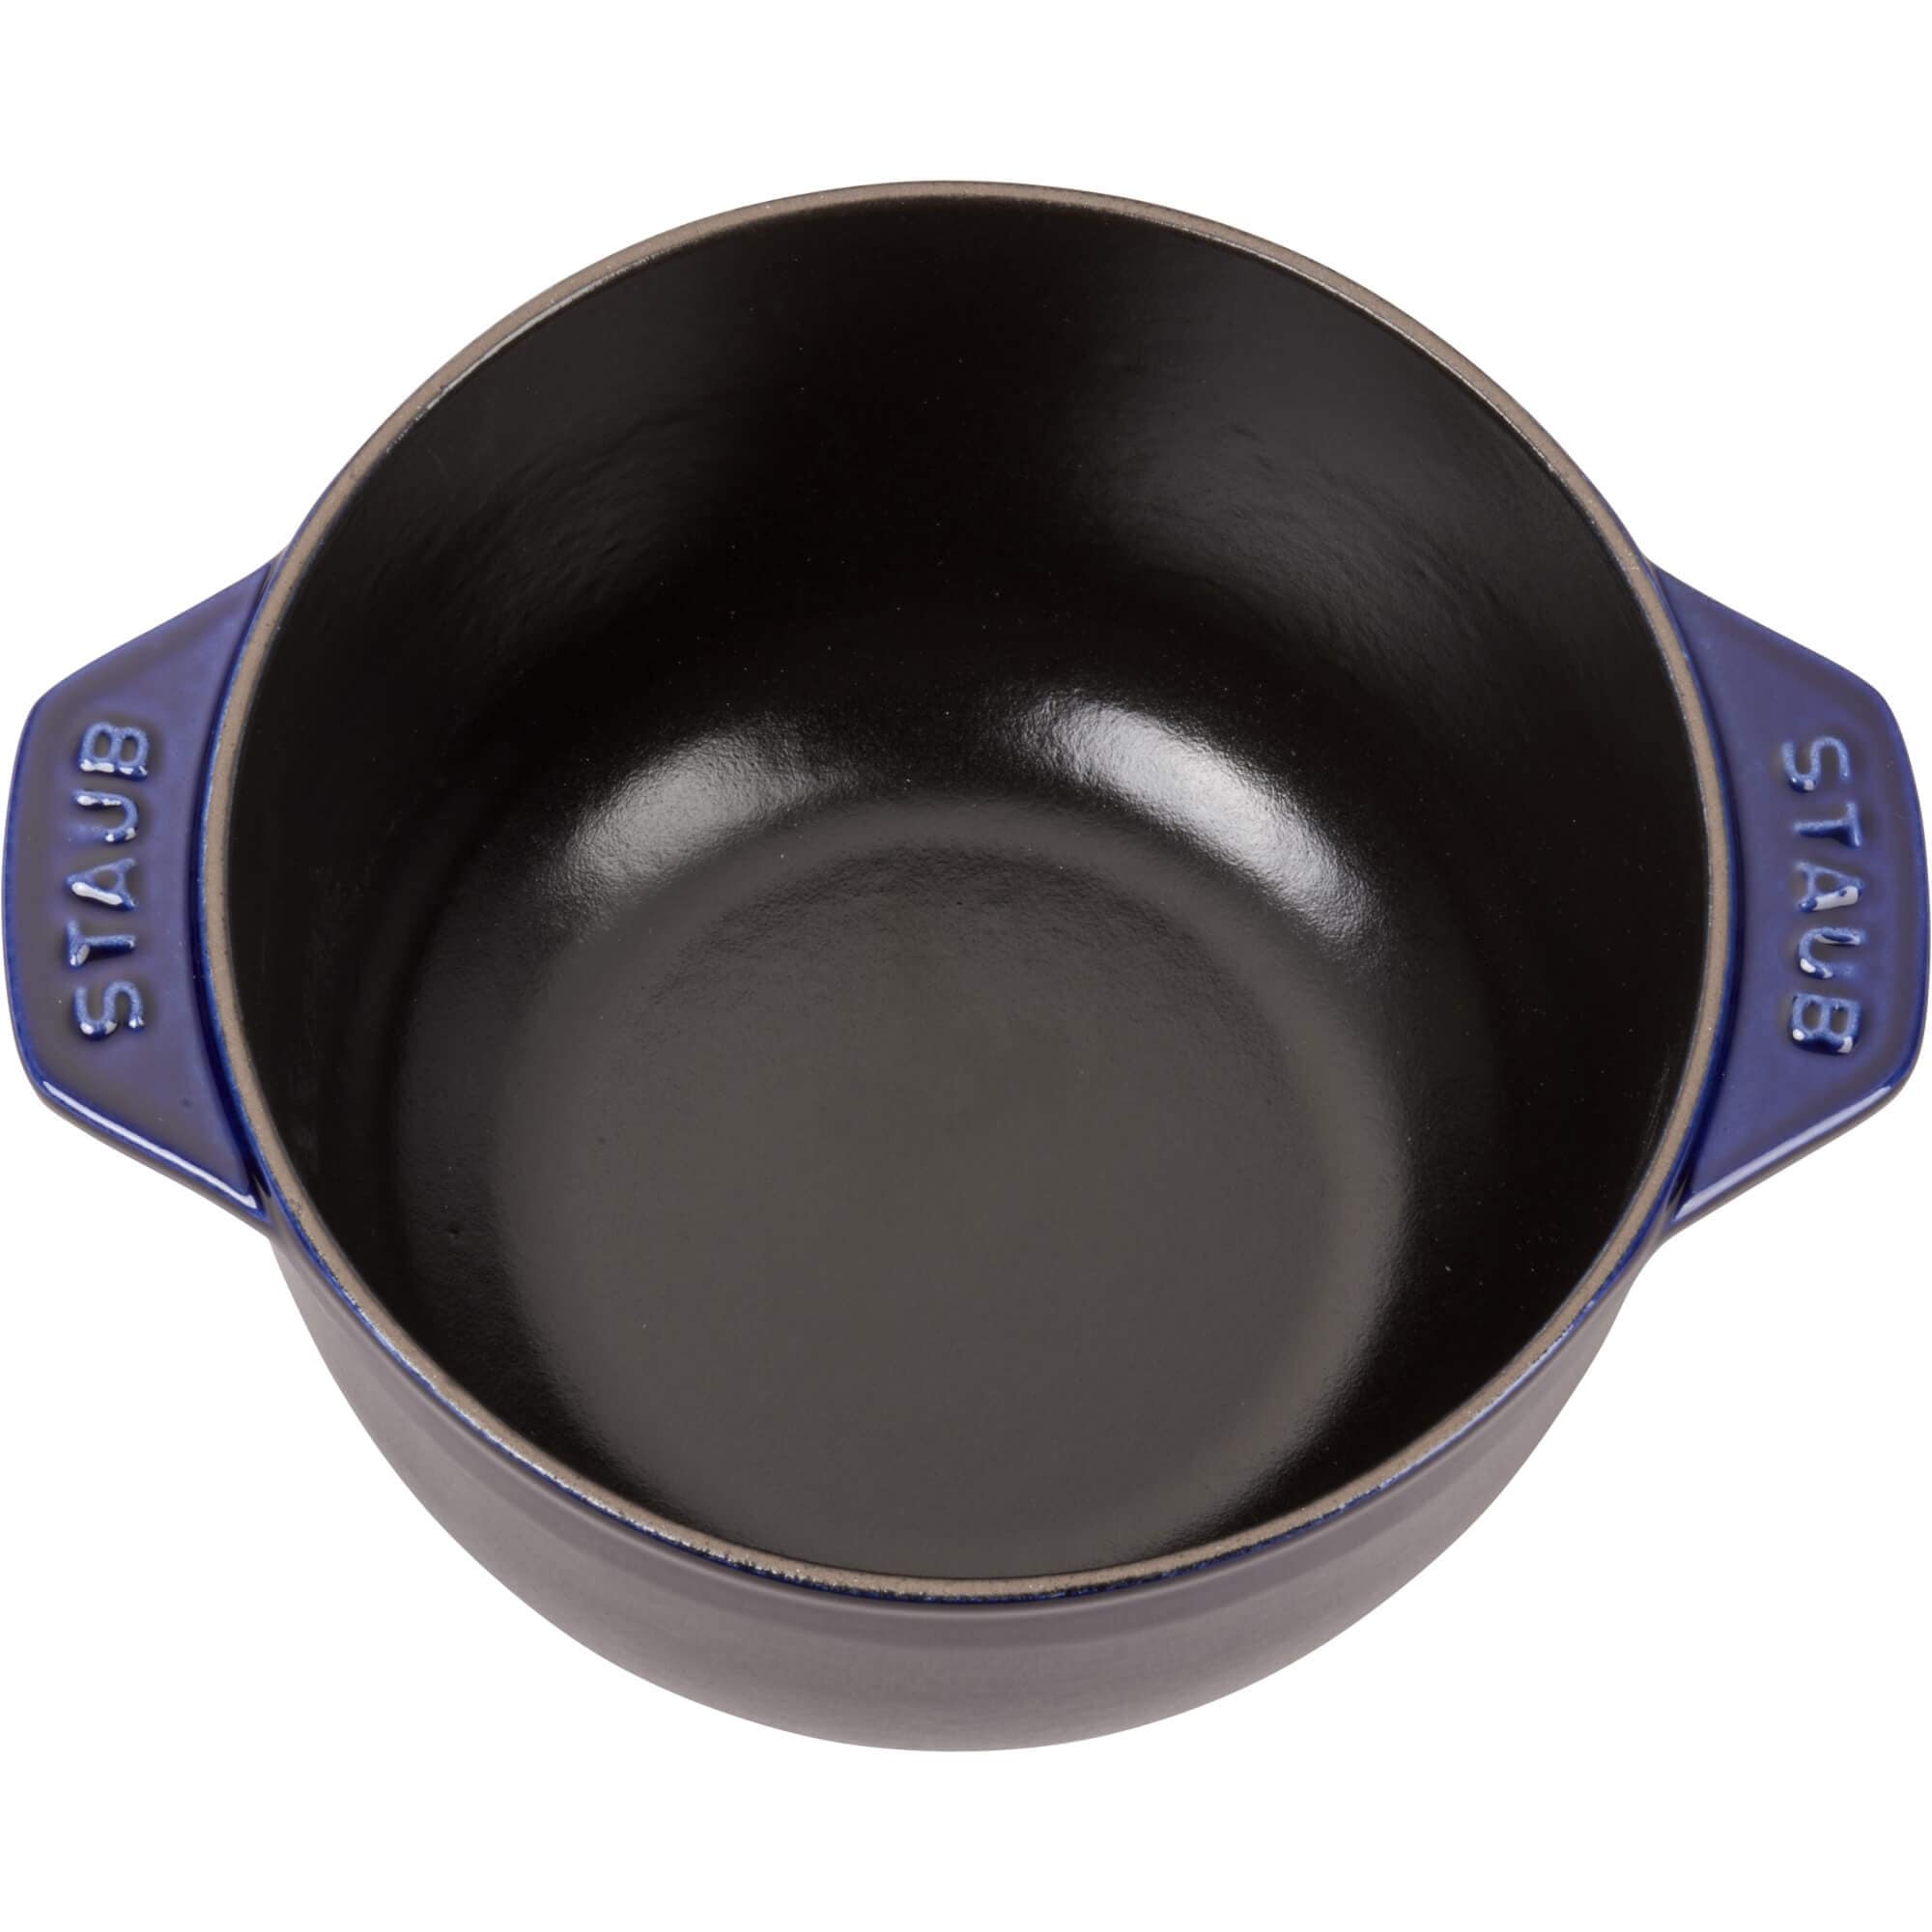 https://ak1.ostkcdn.com/images/products/is/images/direct/9772e153cf0d50f31bd63e04d7c0bbb193d9ddcd/STAUB-Cast-Iron-1.5-qt-Petite-French-Oven.jpg